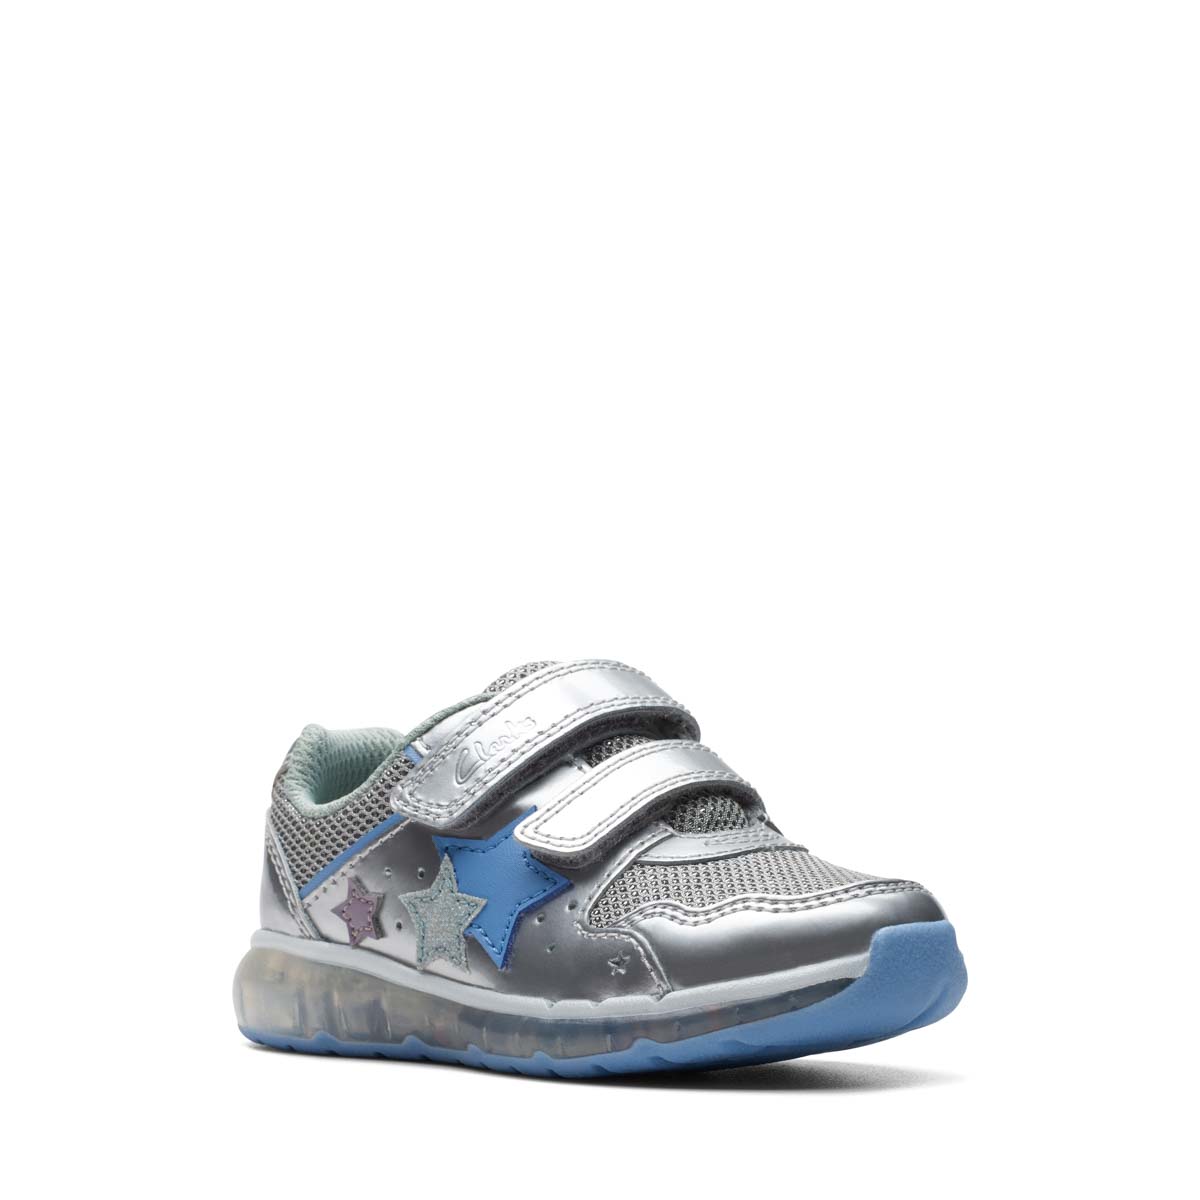 Clarks Spark New T 2V Silver Kids Toddler Girls Trainers 751516F In Size 5 In Plain Silver F Width Fitting Regular Fit